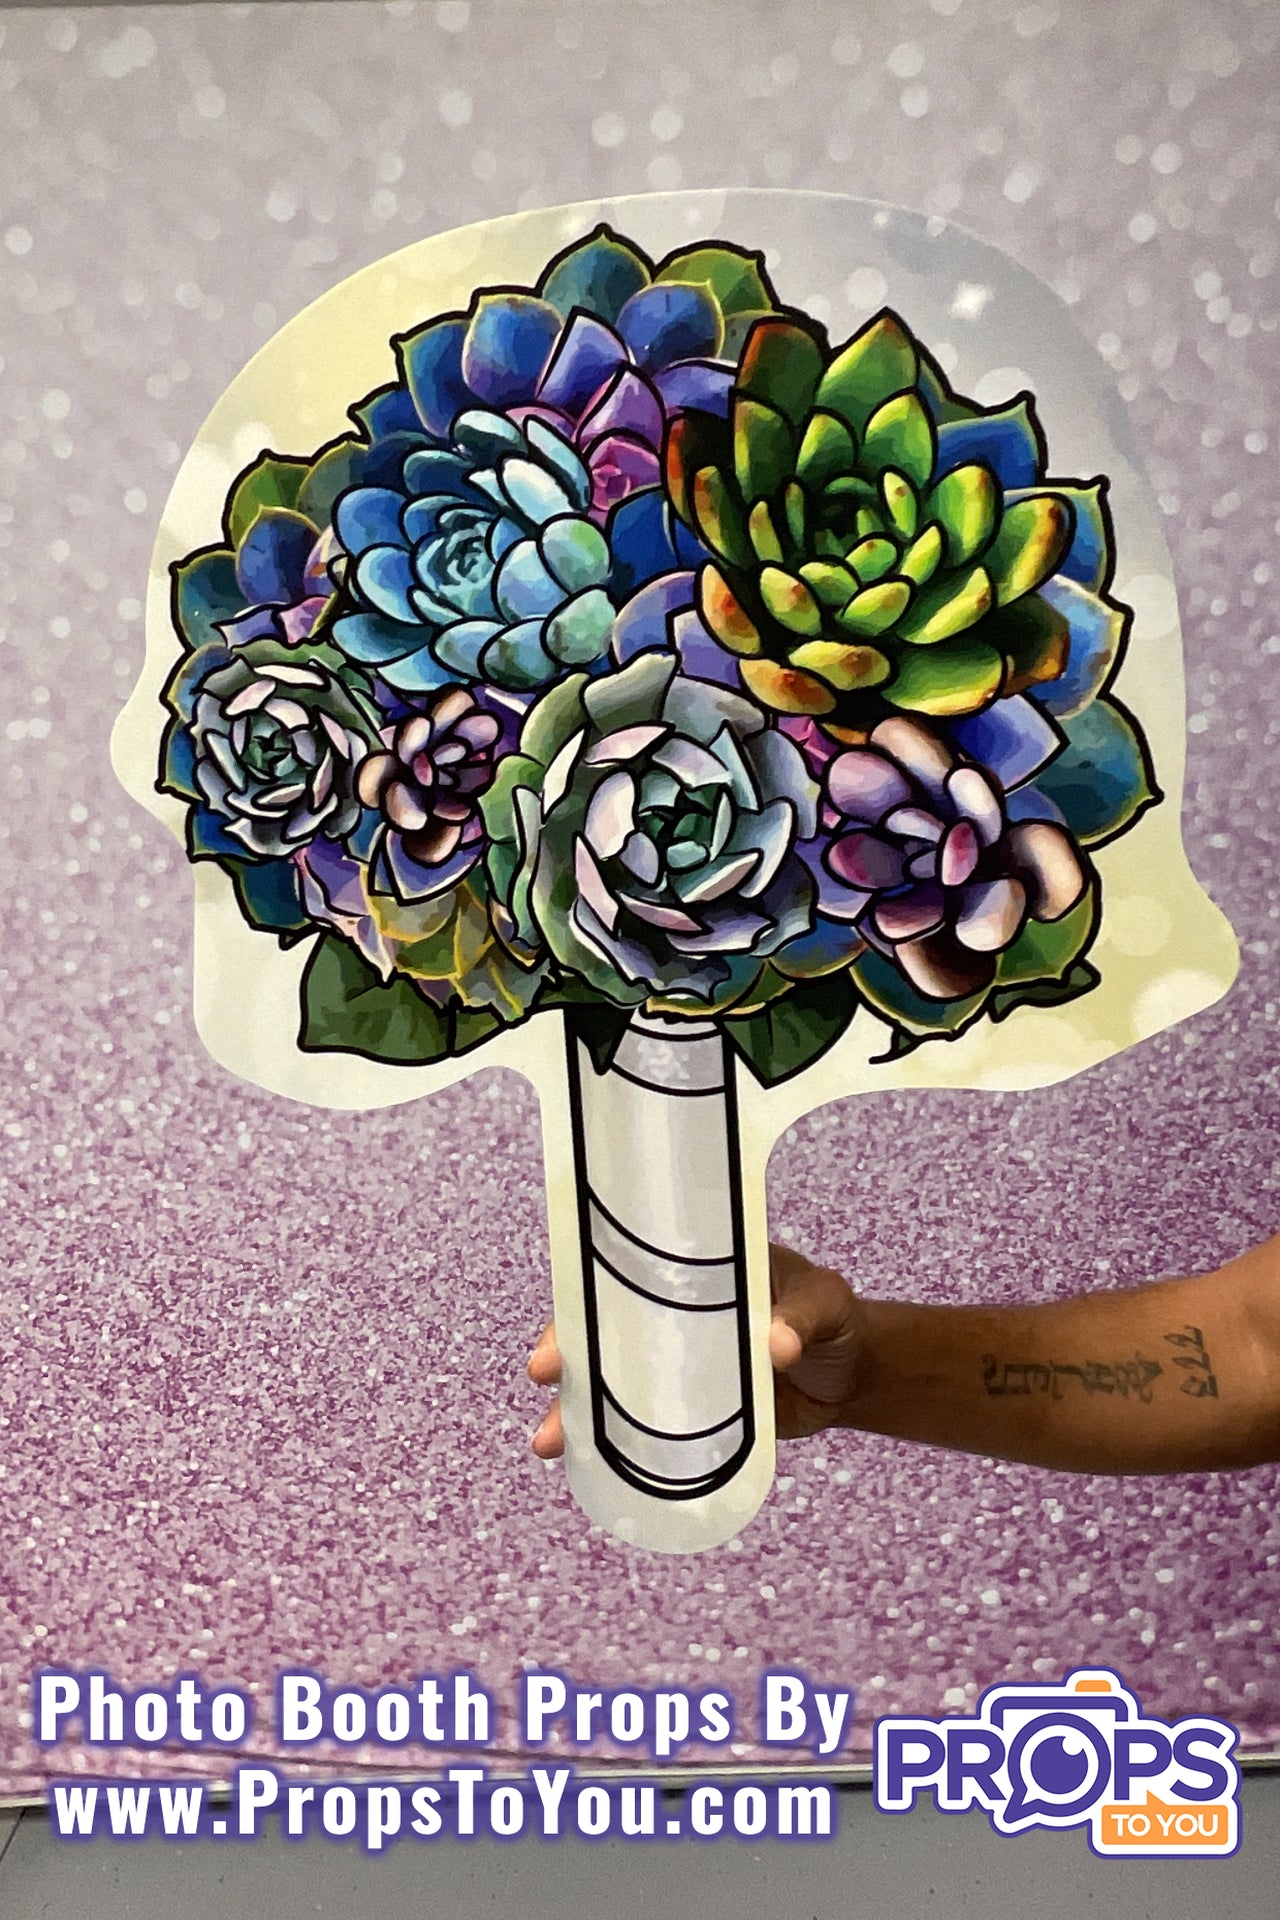 HUGE Props: All Greens/Multi Colored Succulent Bouquet Photo Booth Prop